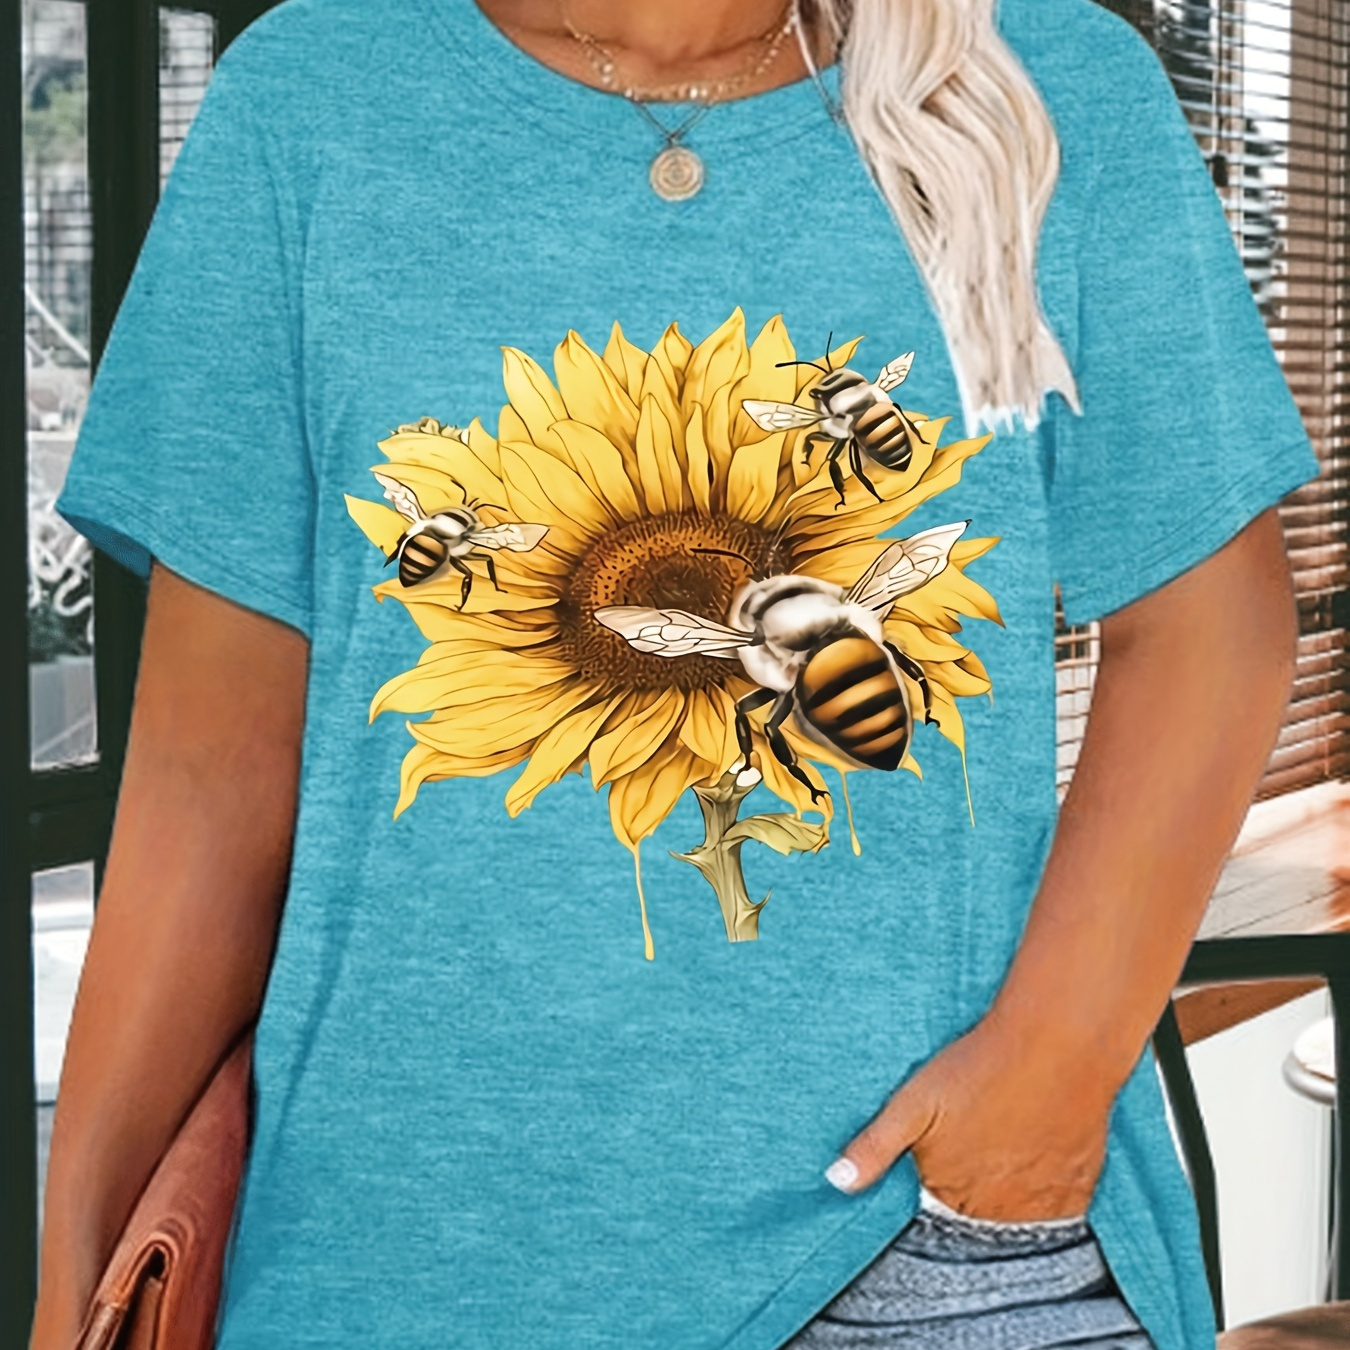 

Plus Size Sunflower & Beeprint T-shirt, Casual Short Sleeve Crew Neck Top For Spring & Summer, Women's Plus Size Clothing